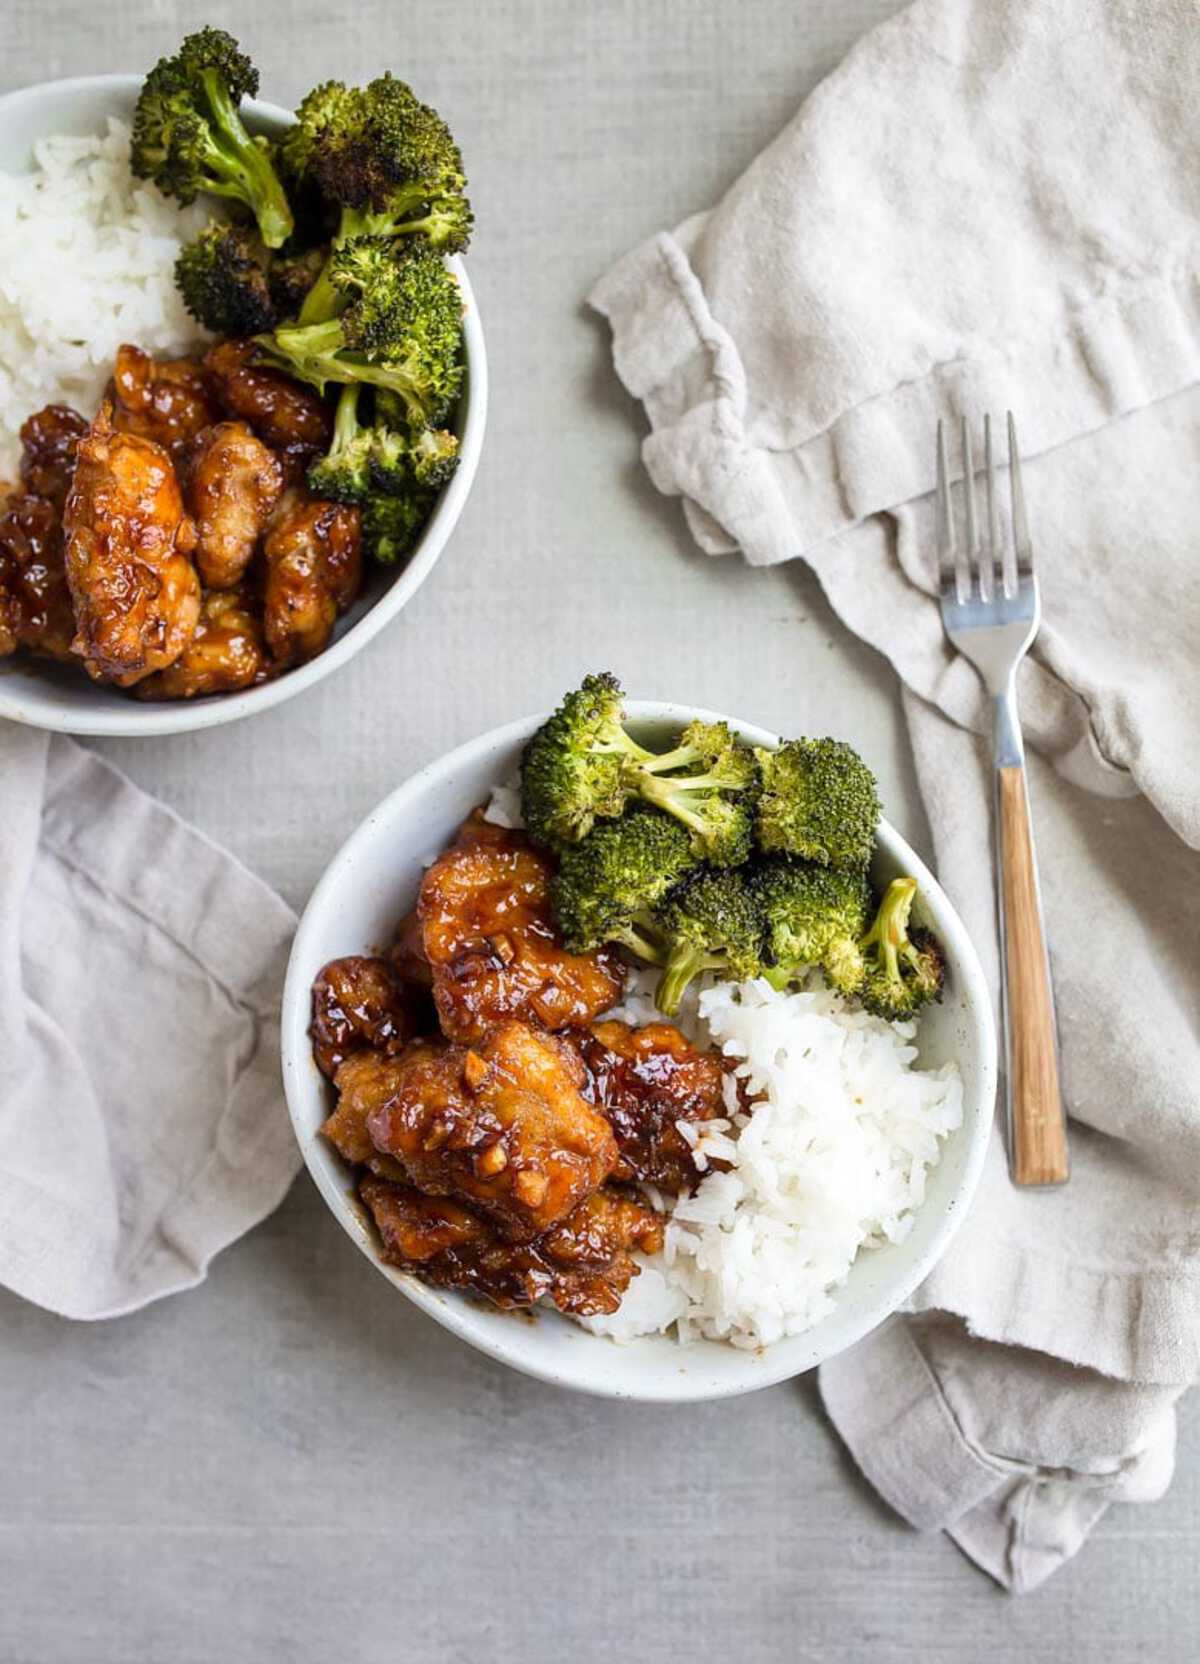 Chicken with rice and broccoli on white plate